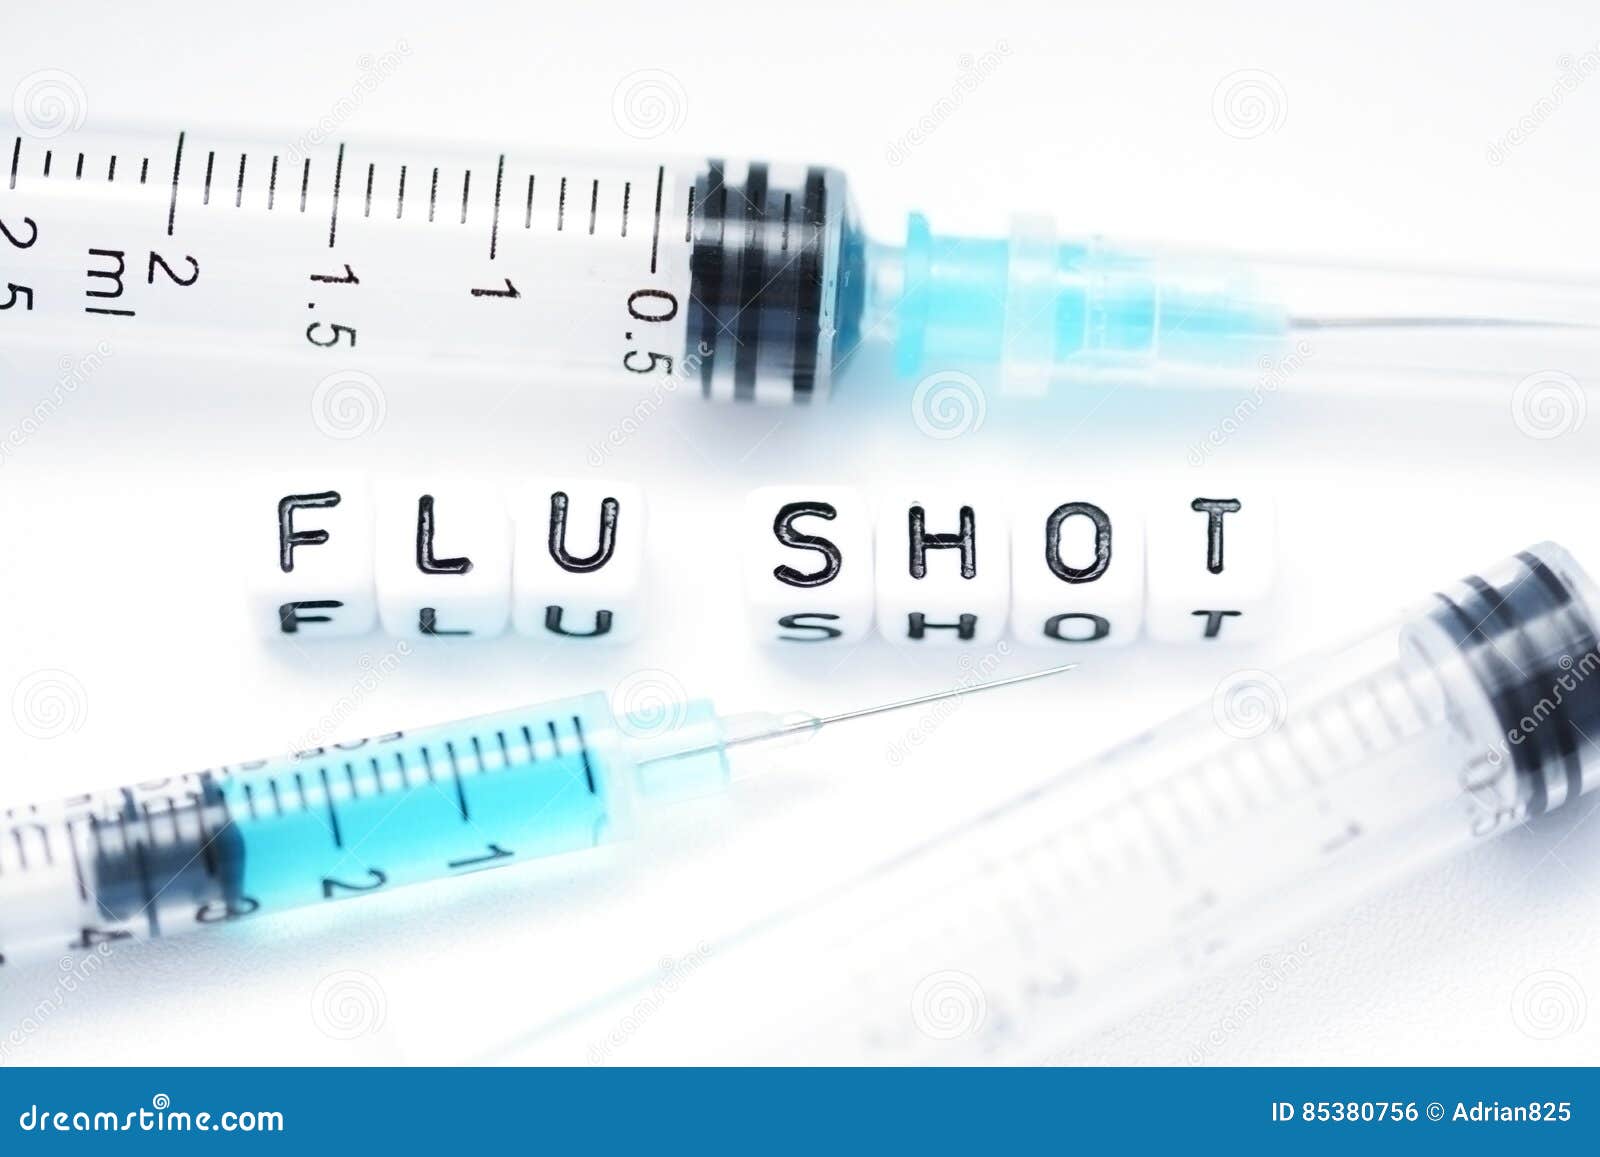 flu shot text spelled with tiled letters standing next to a syringe